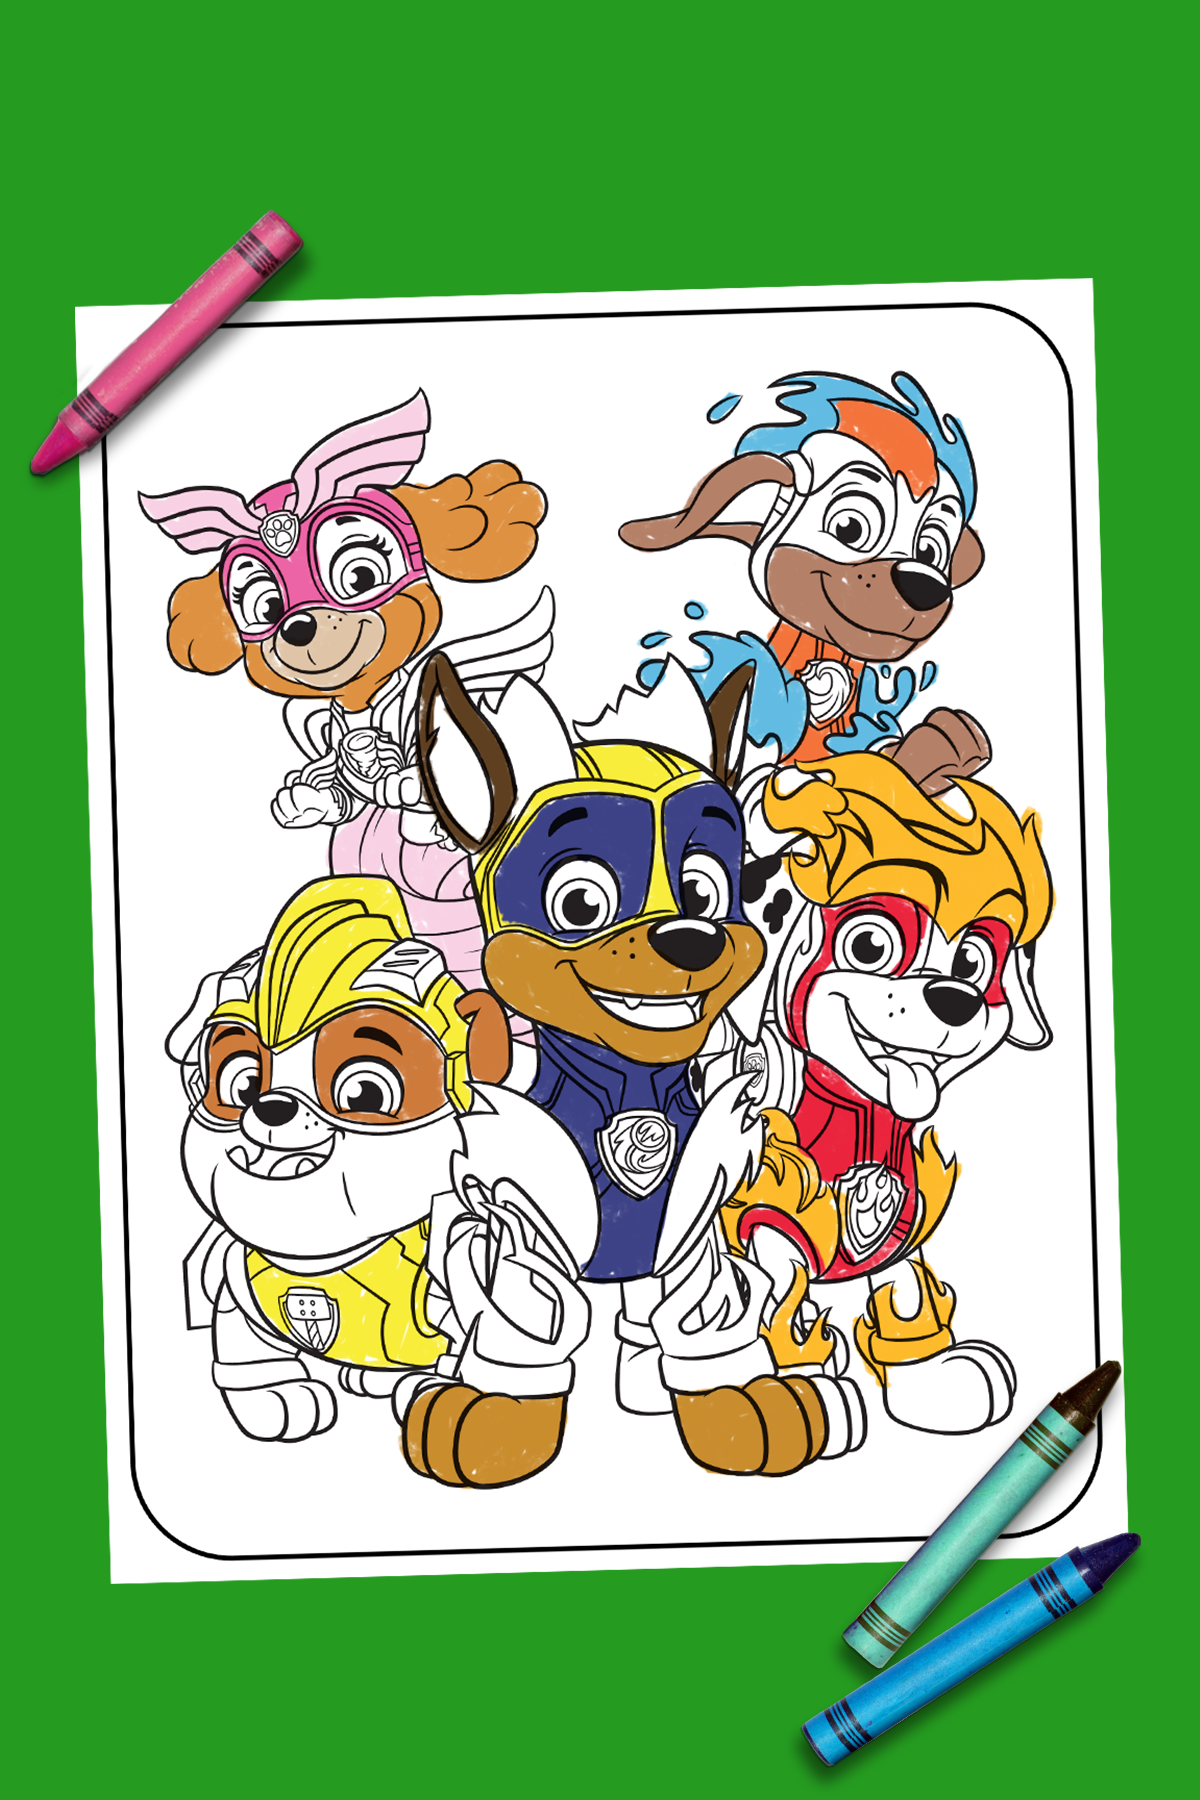 PAW Patrol Mighty Pups Coloring Page | Nickelodeon Parents